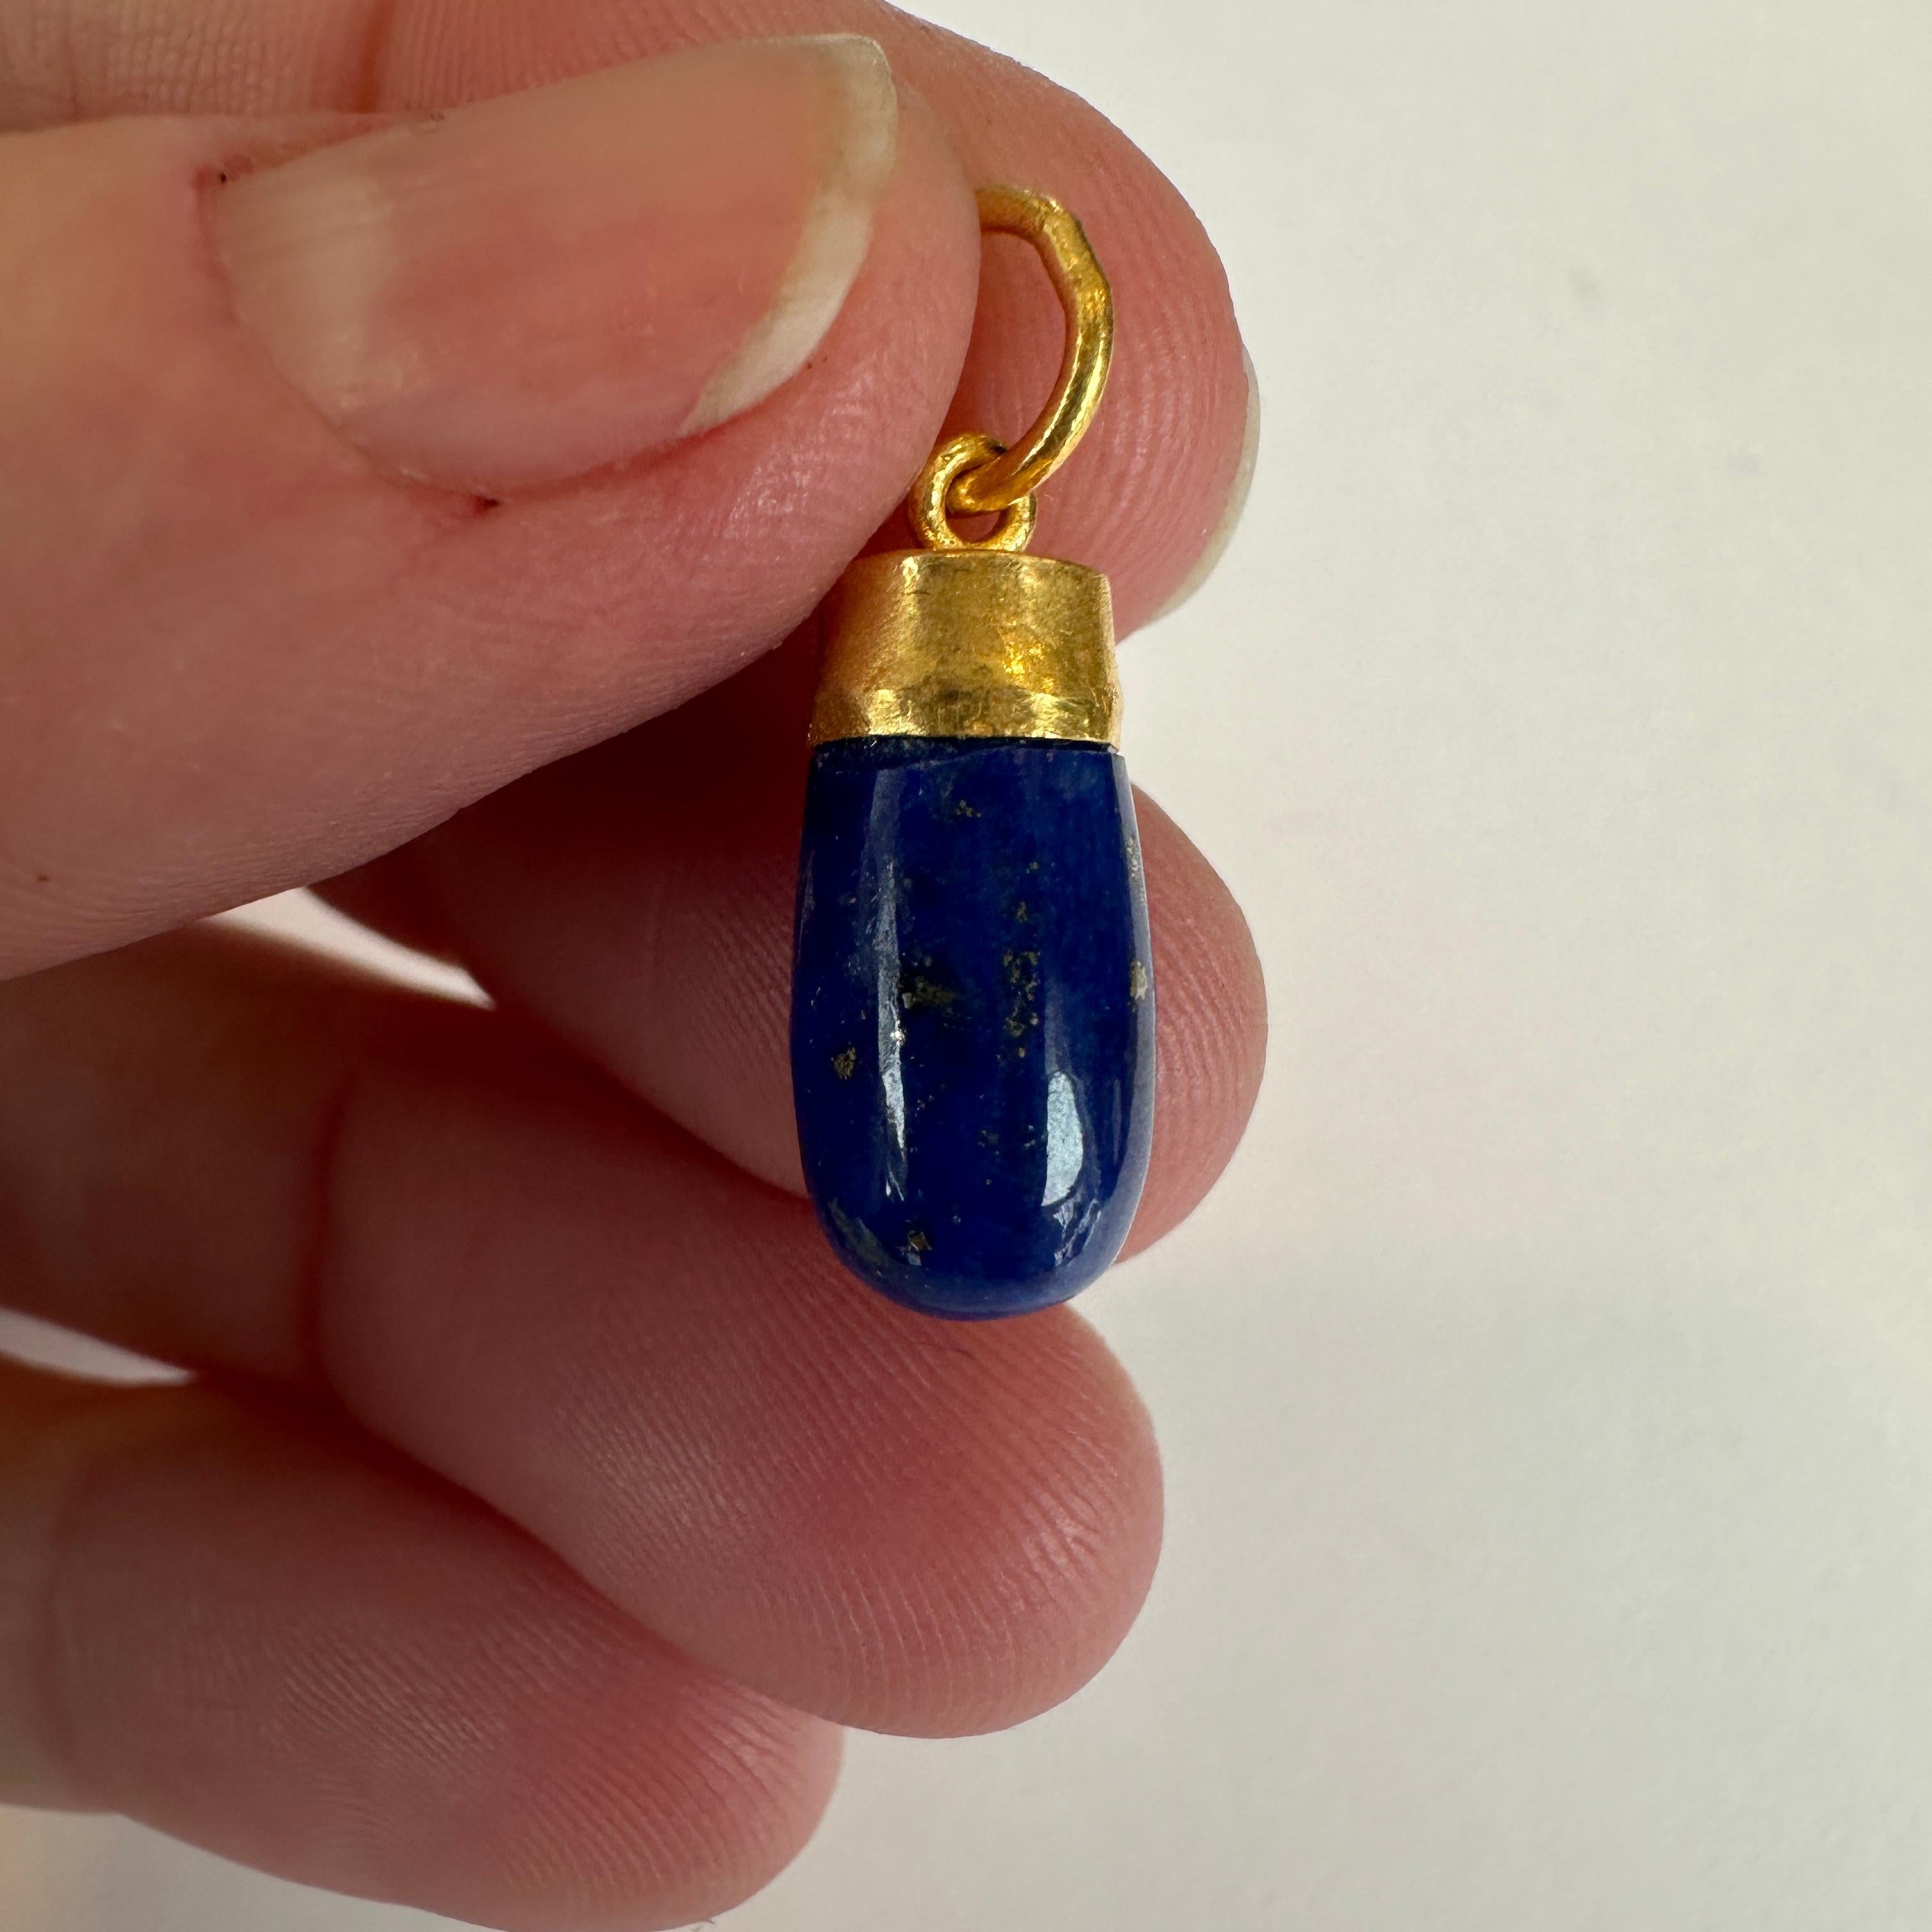 24kt Yellow Gold 7.00ct Lapis Lazuli Drop Charm Pendant Necklace In New Condition For Sale In Bozeman, MT